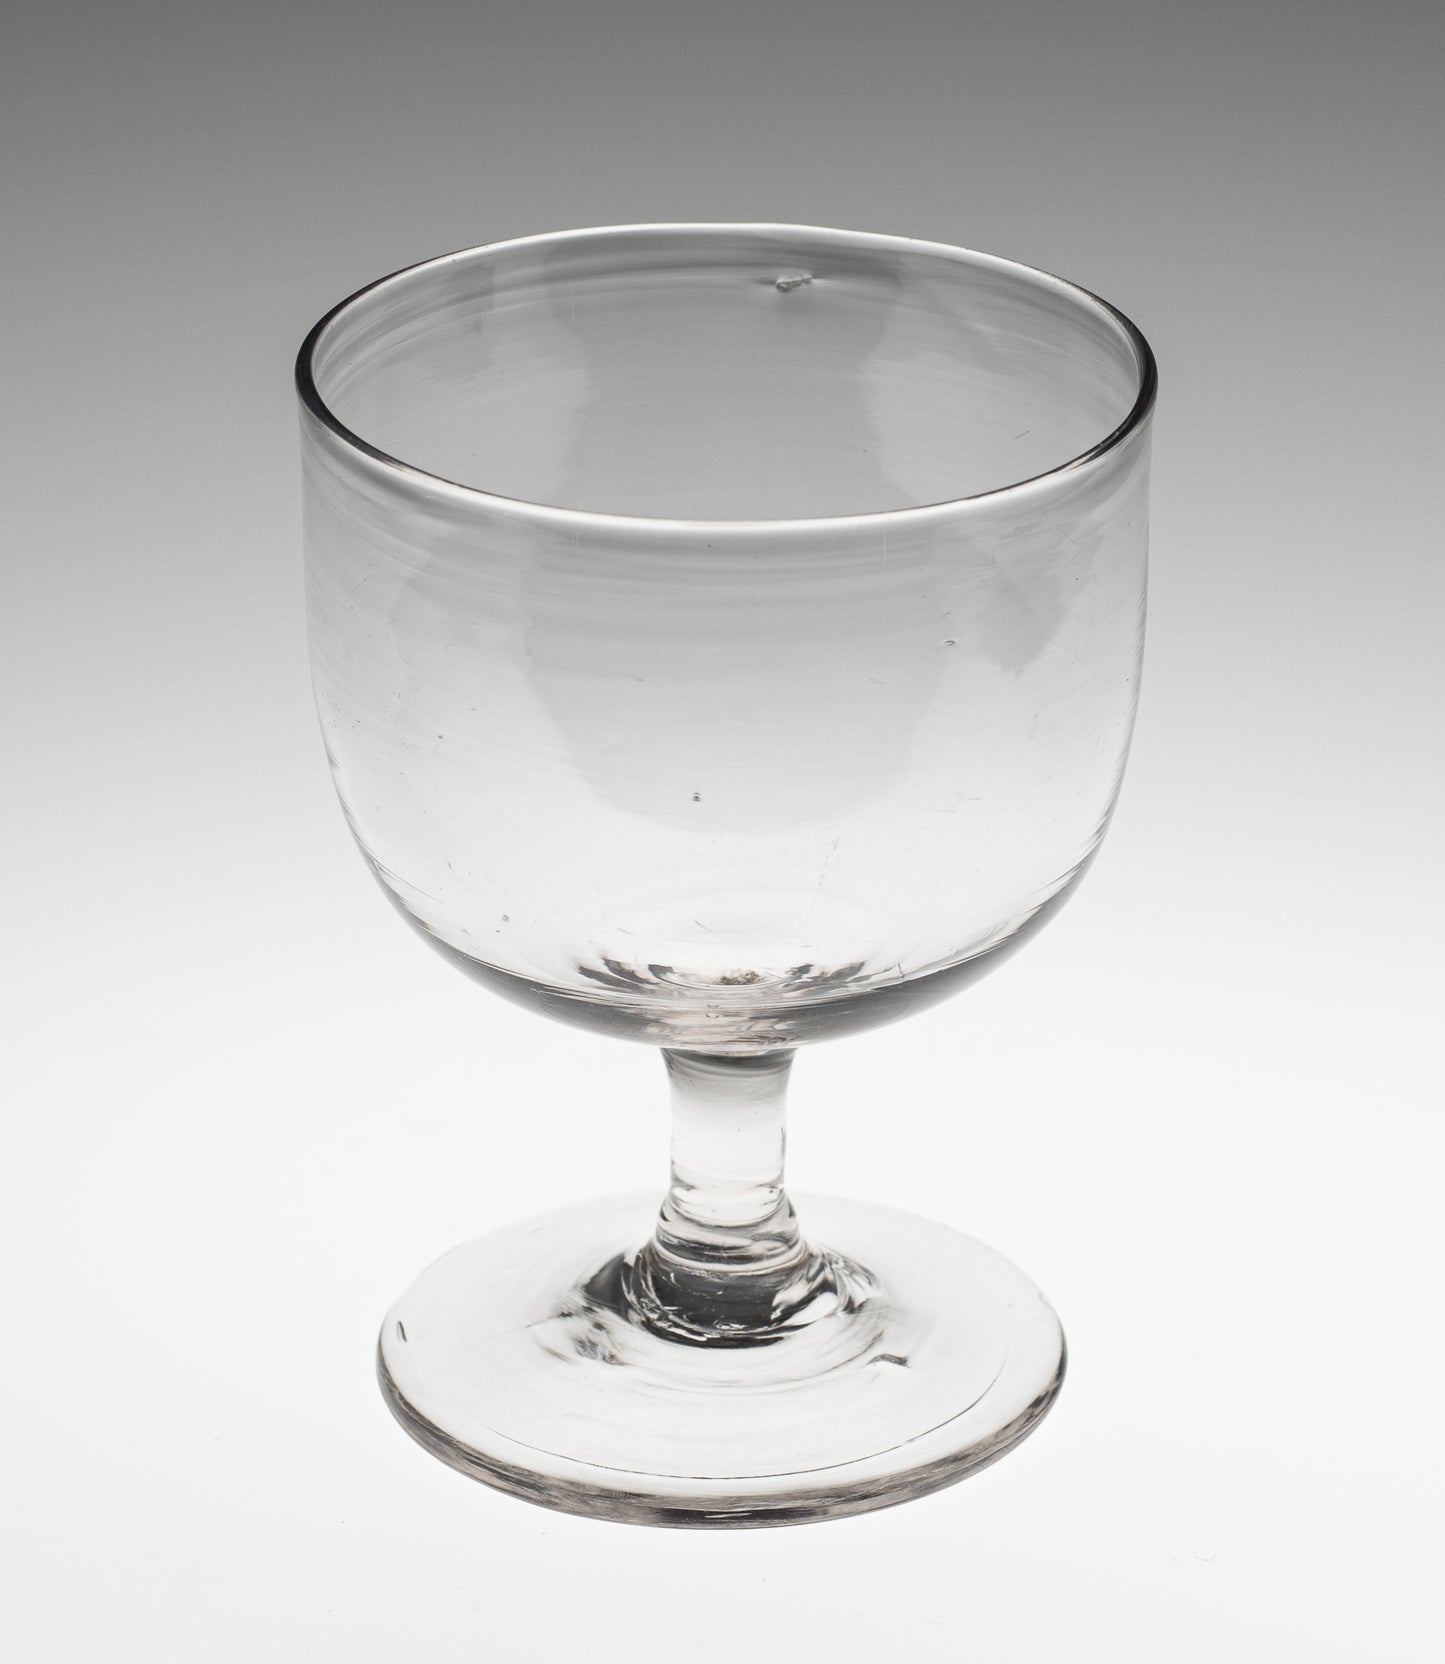 Early 19th Century Georgian Glass Rummer with Stem c1800 - English Lead Type (Code 2342)